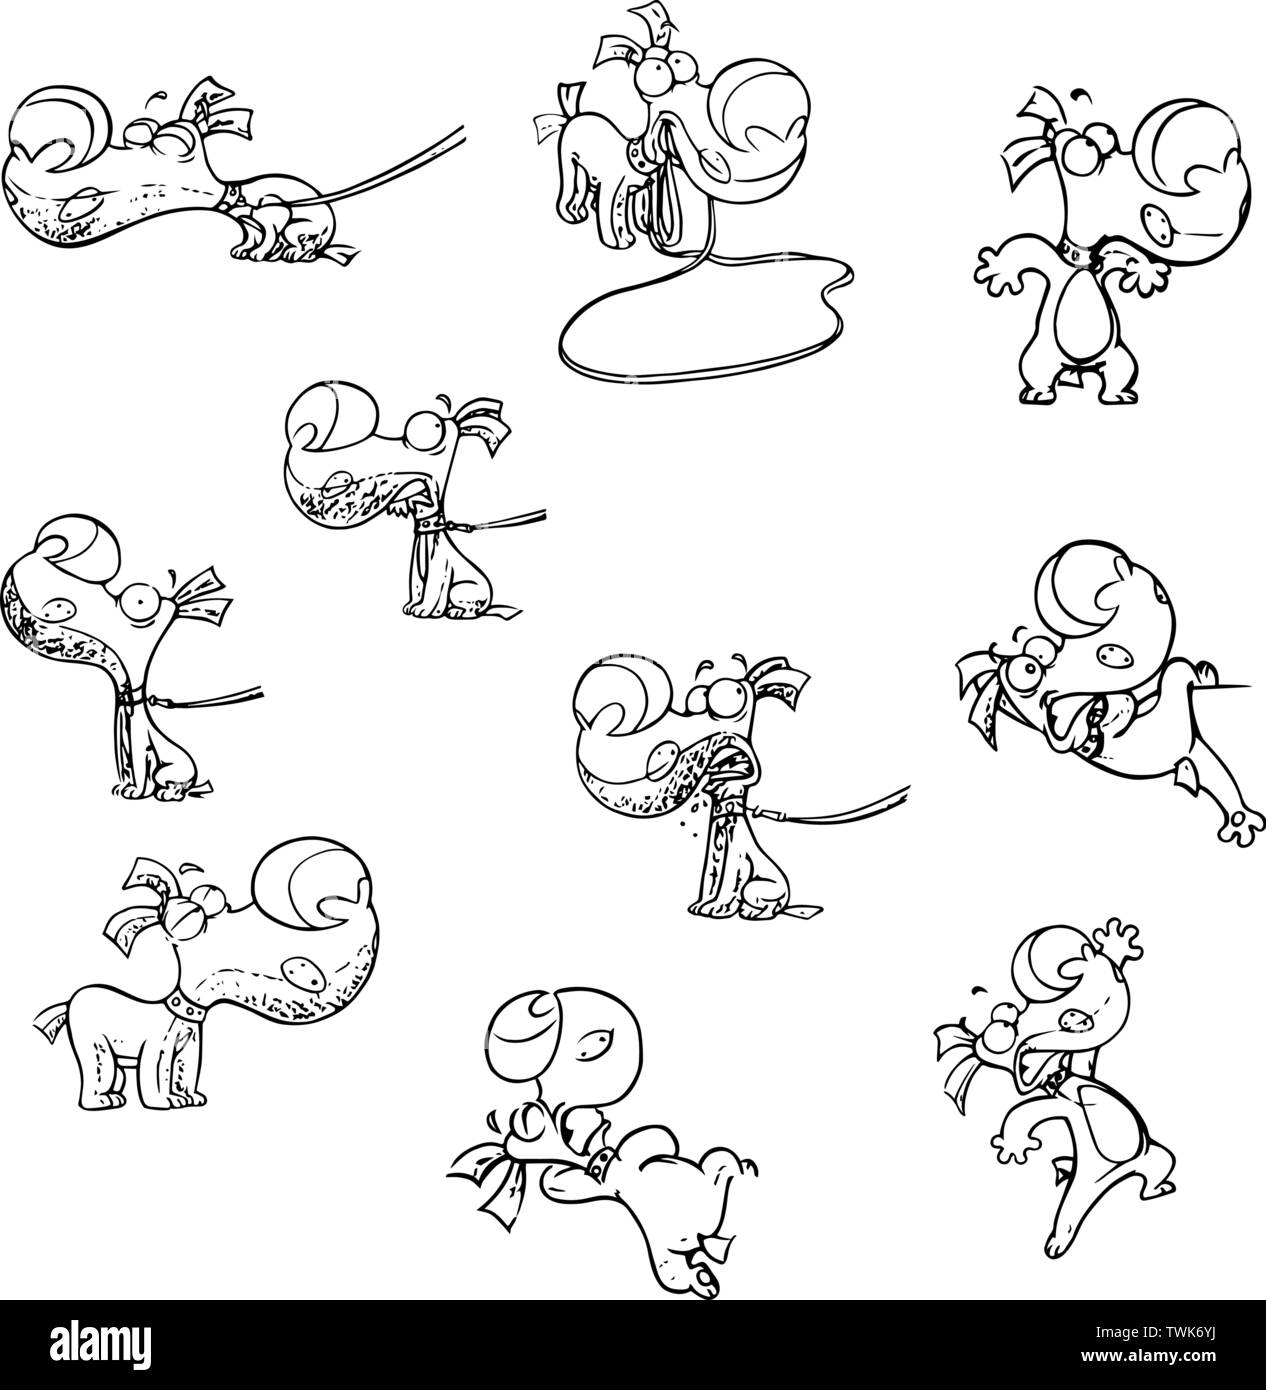 Set of vector illustrations with a funny cartoon puppy with different emotions and in various poses. The illustration of the dog is made in a black ou Stock Vector